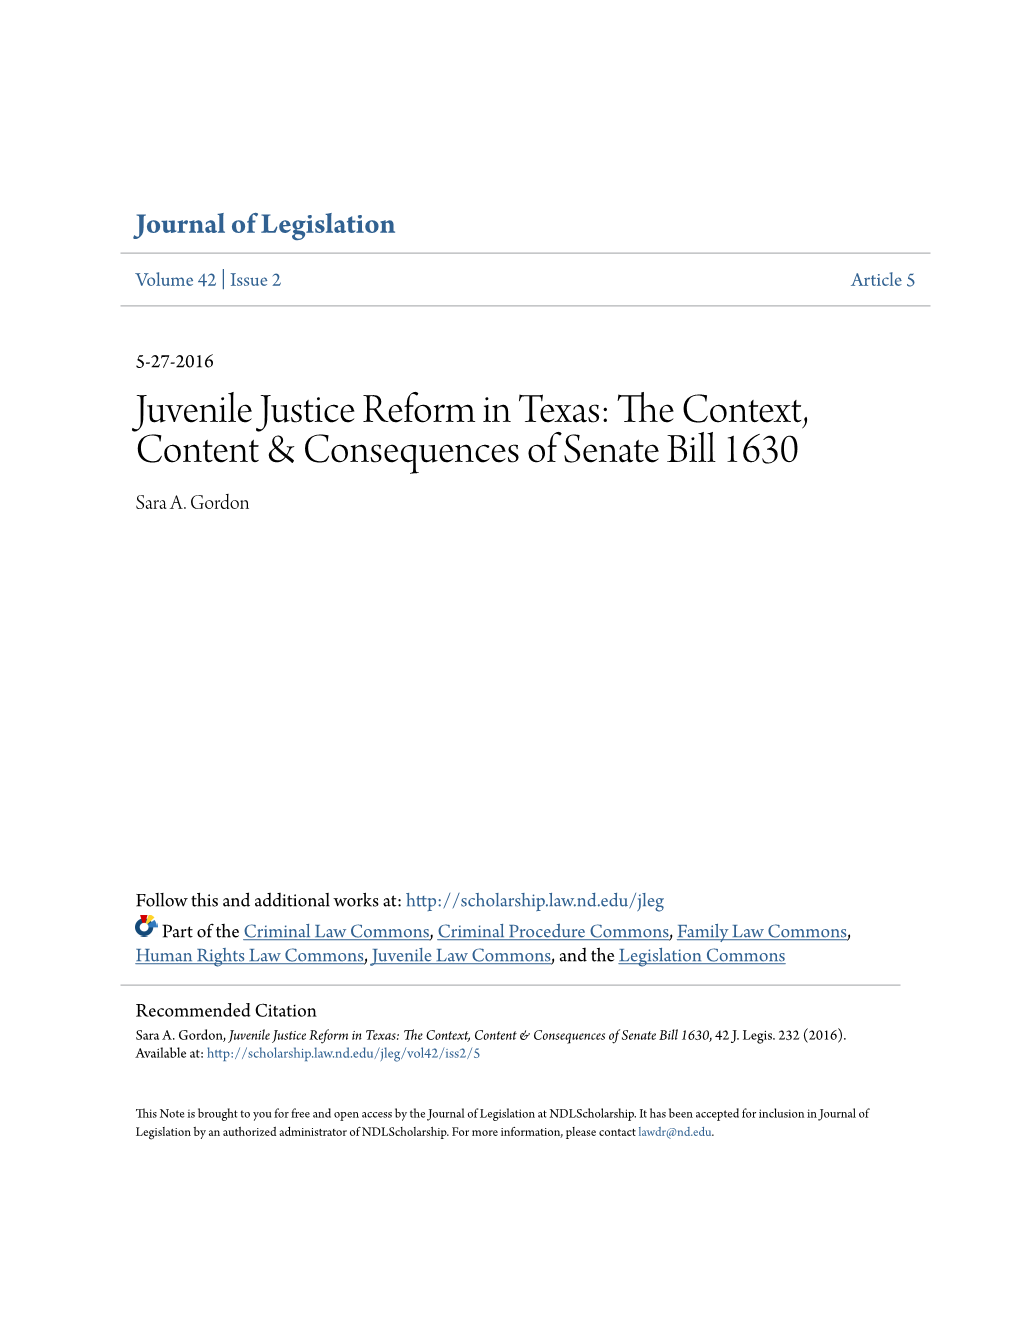 Juvenile Justice Reform in Texas: the Onc Text, Content & Consequences of Senate Bill 1630 Sara A